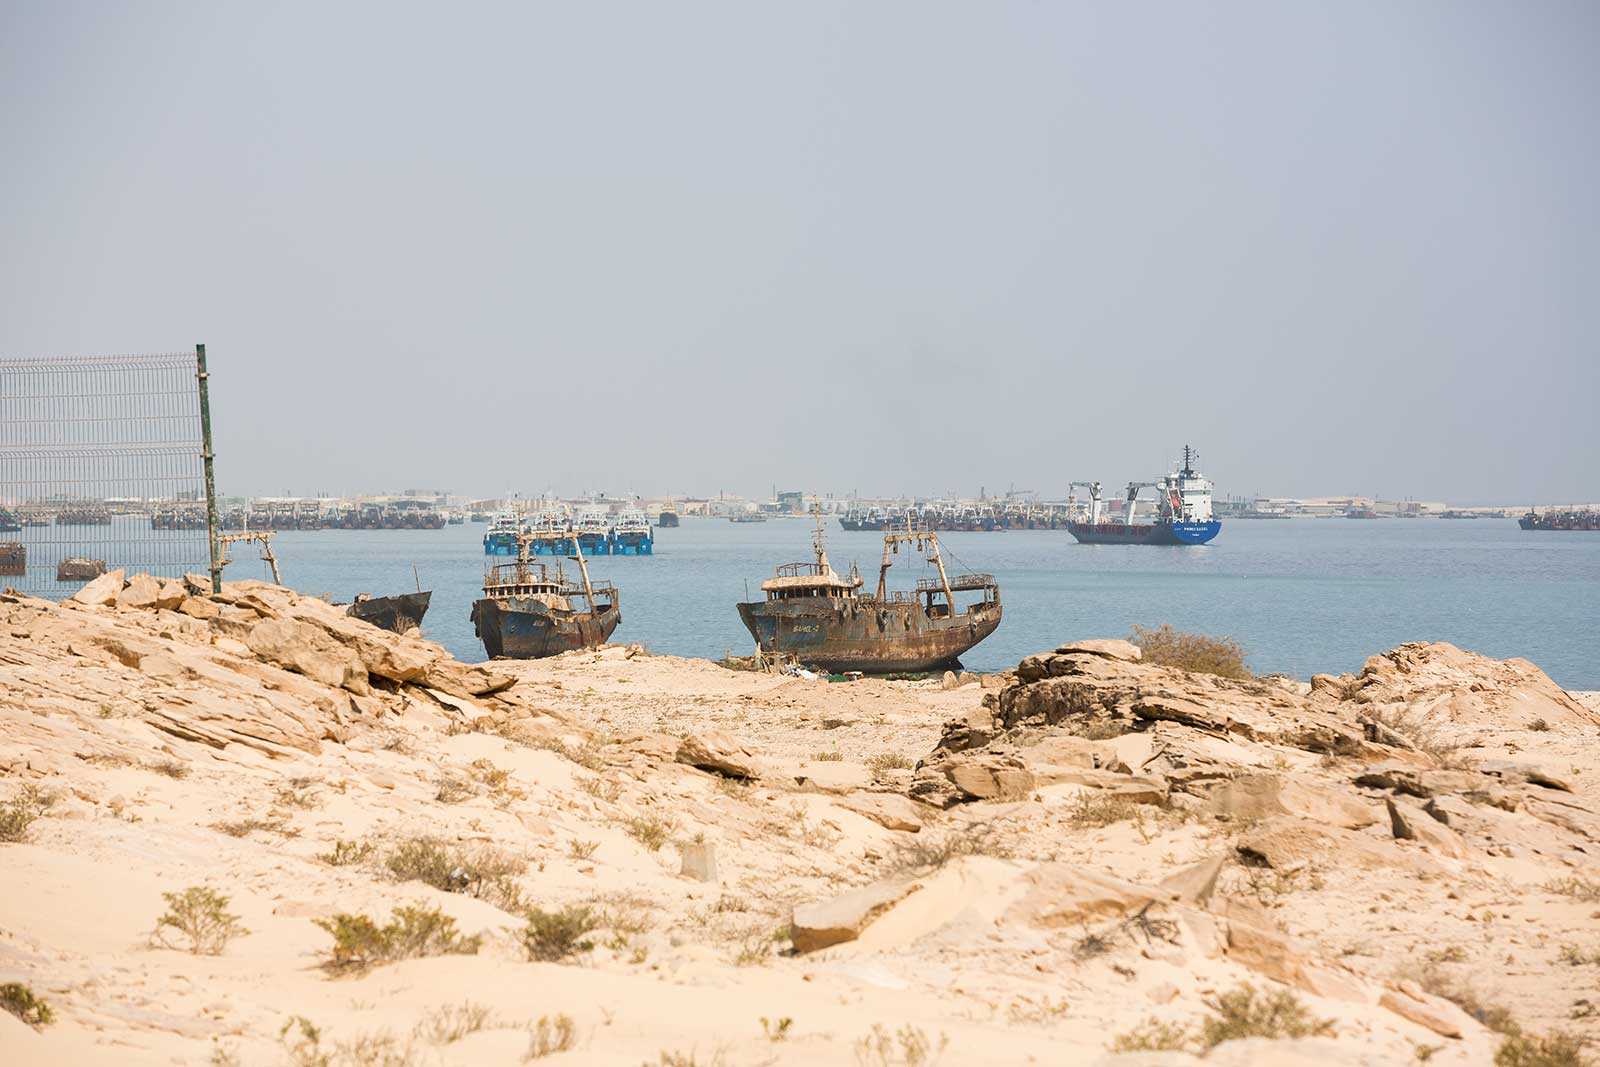 The view off the coast of Mauritania’s Bay of Nouadhibou used to be spotted with rusting hulks in every direction. Today, this Ship Breaking Yard is almost gone, due to an injection of capital from the Chinese.